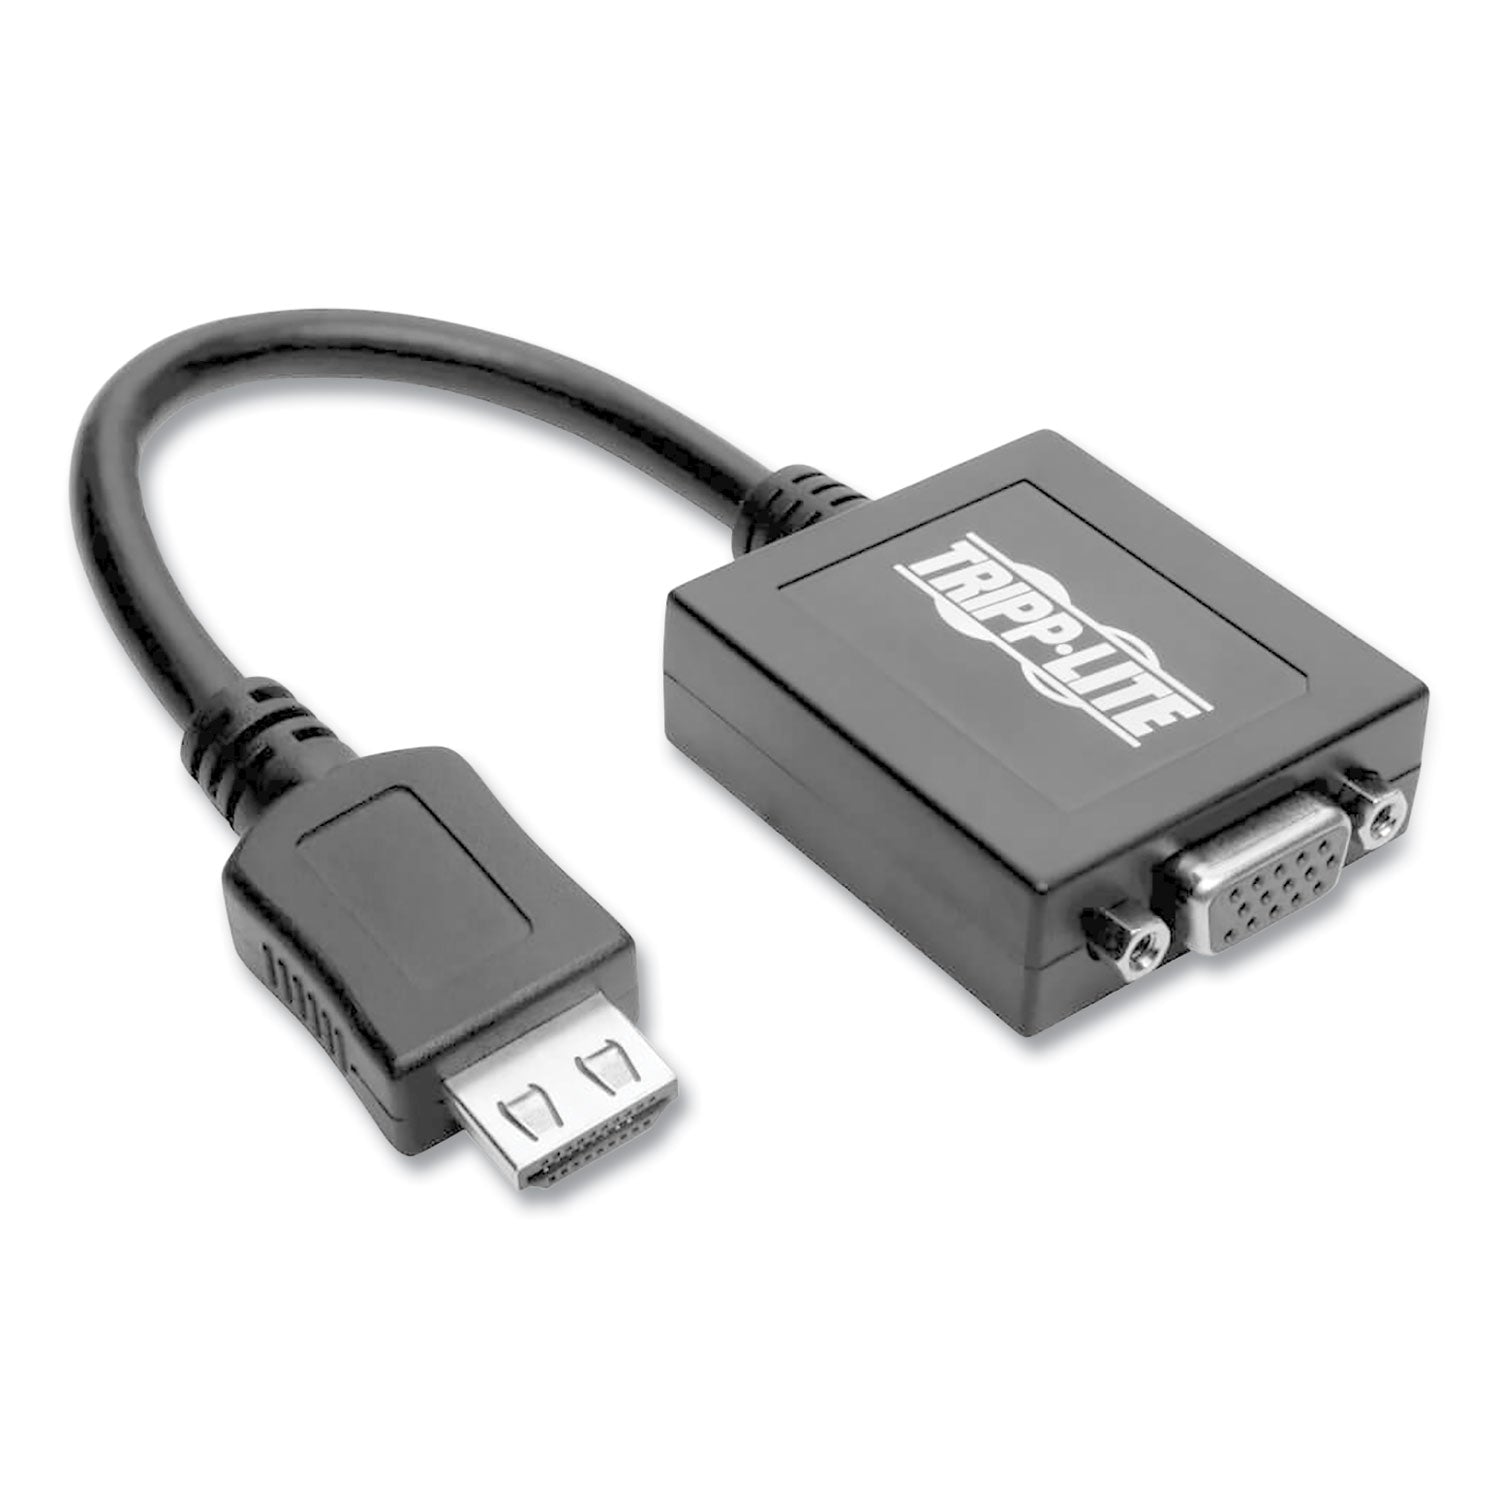 hdmi-to-vga-with-audio-converter-cable-6-black_trpp13106n - 1